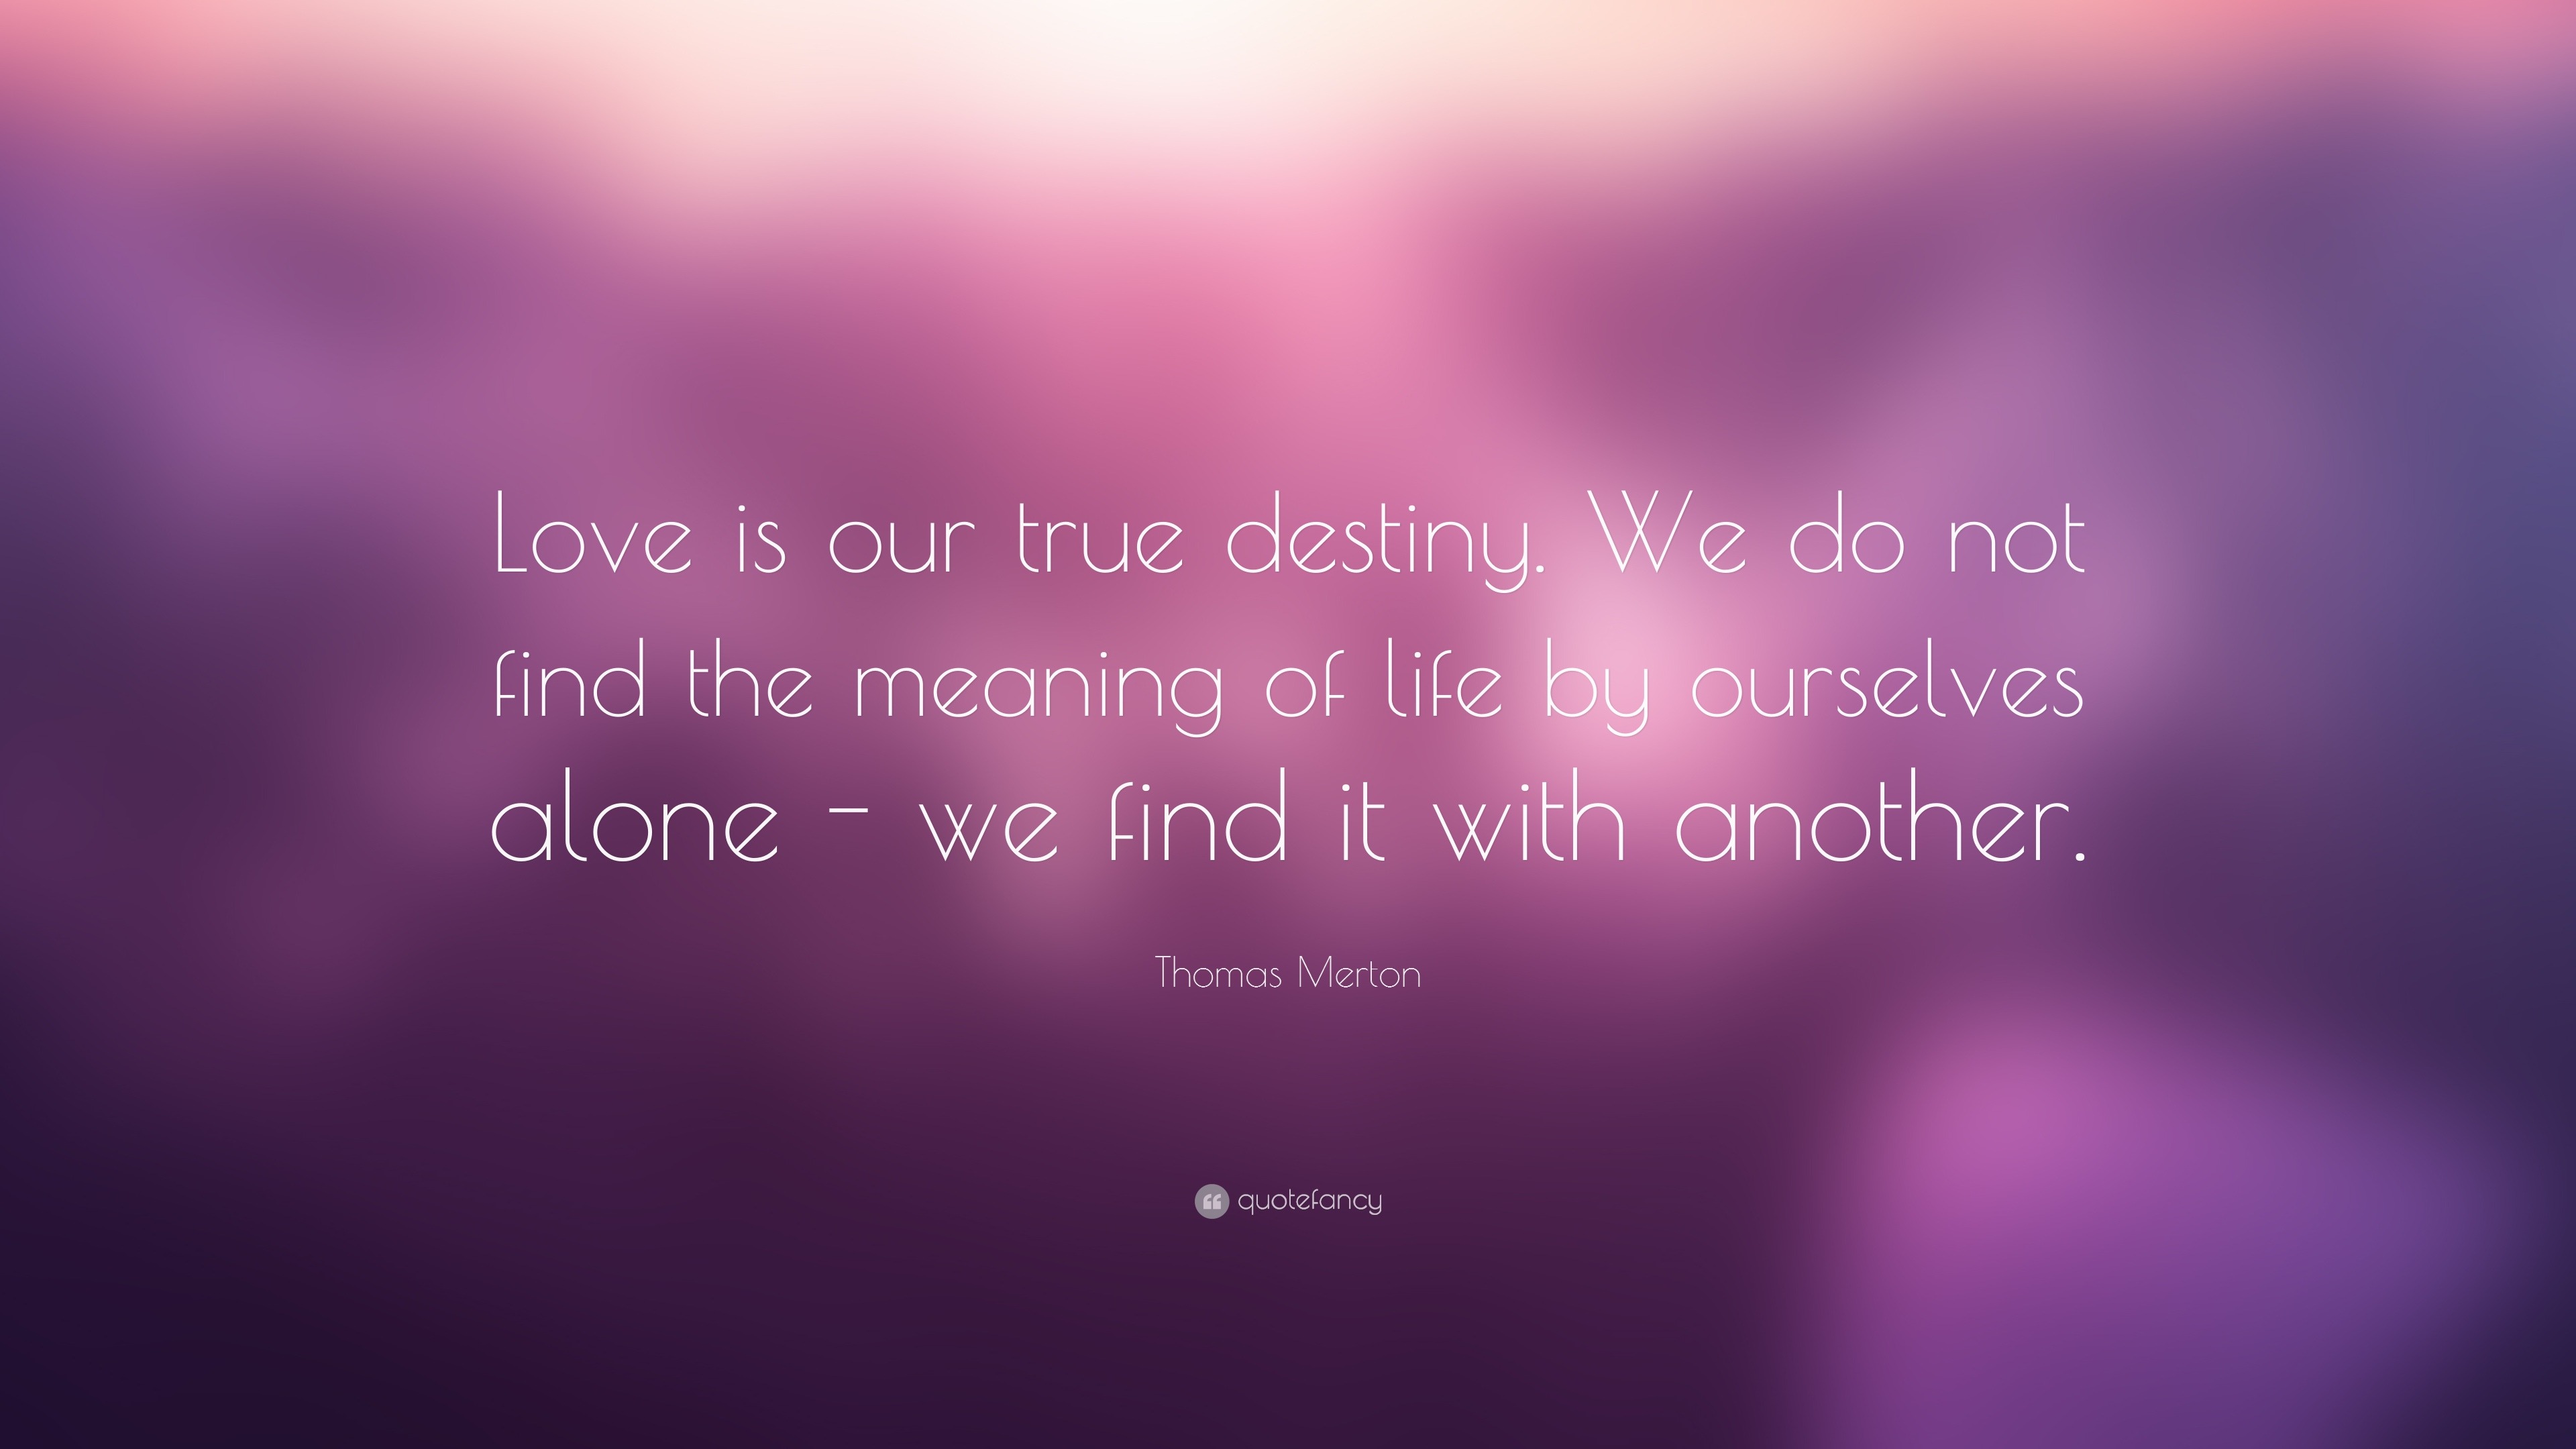 11637 Thomas Merton Quote Love is our true destiny We do not find the